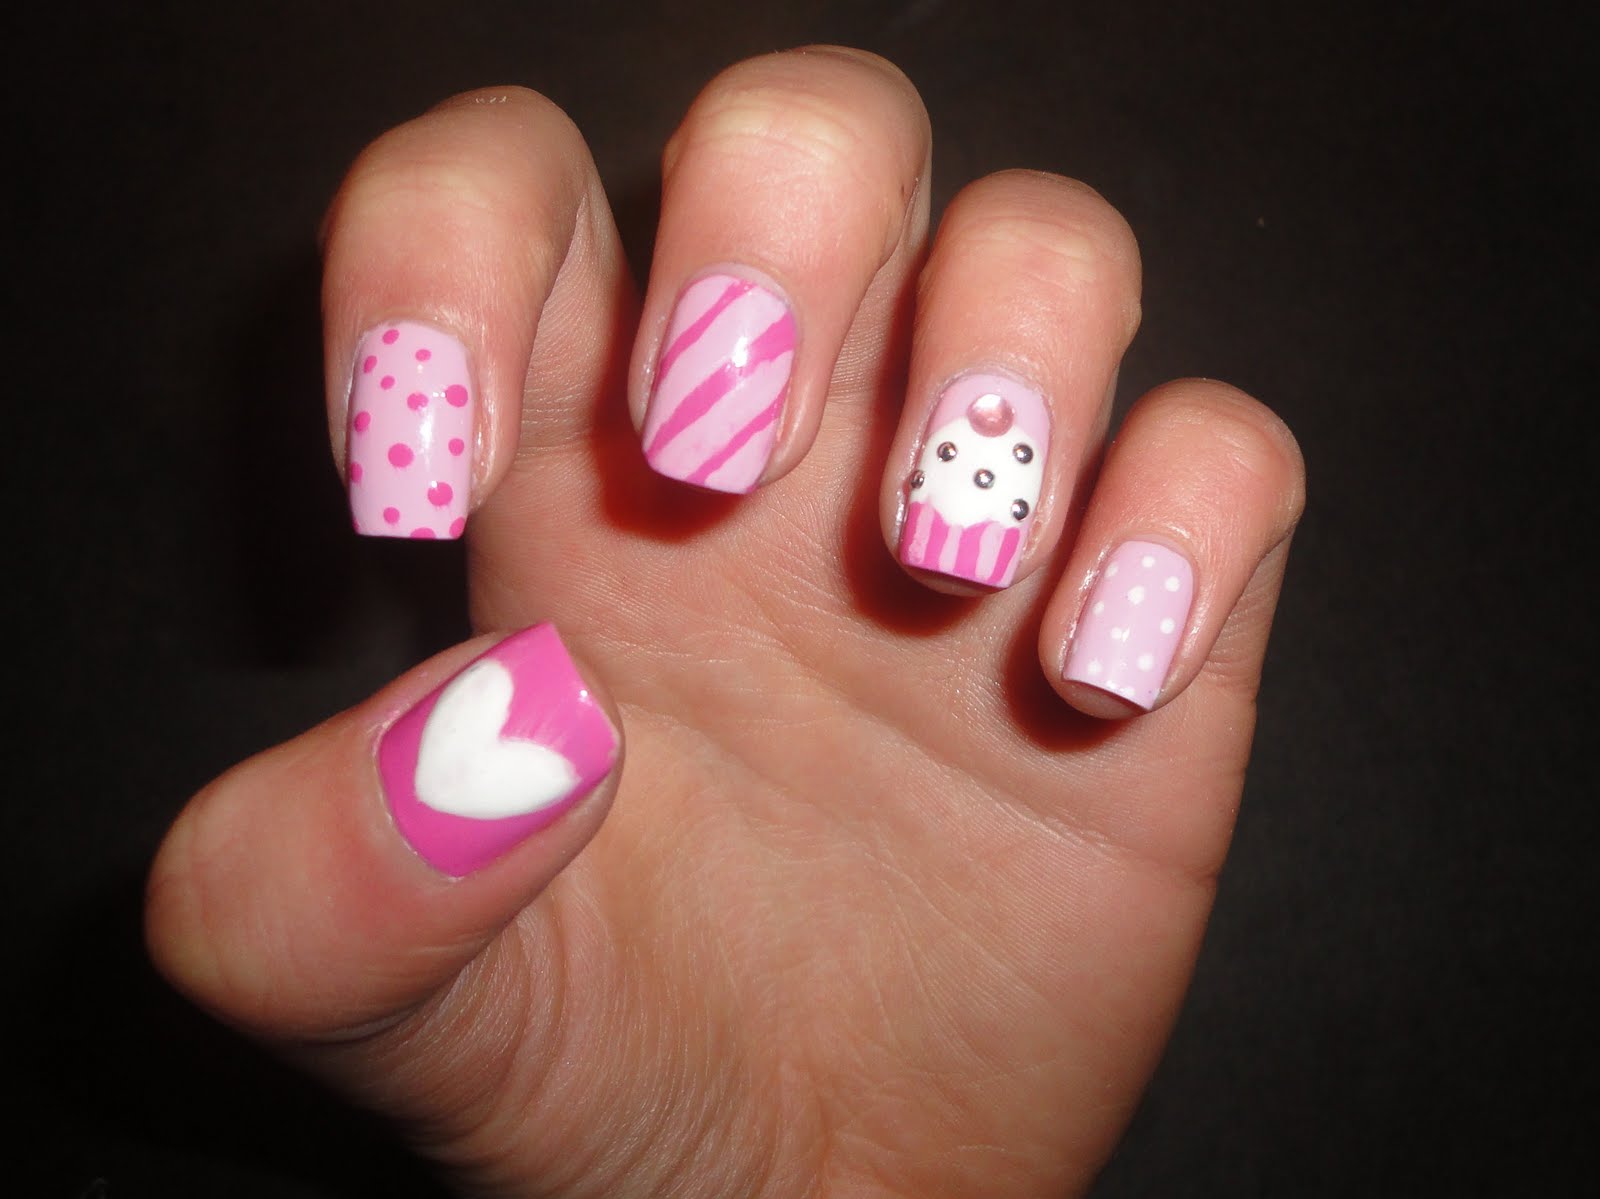 yummy creamy and delicious pink white candies and cupcakes on nails